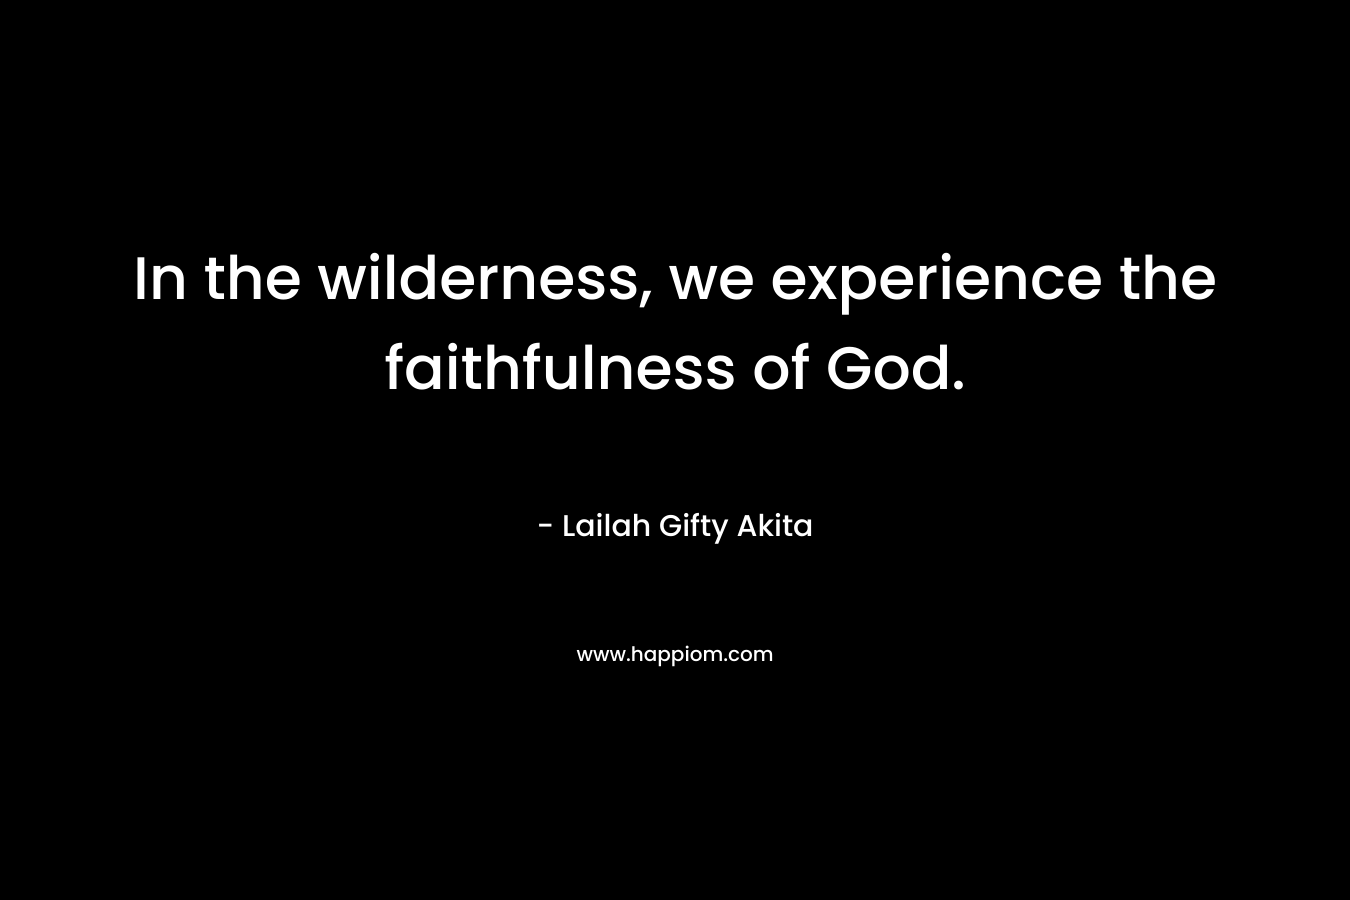 In the wilderness, we experience the faithfulness of God.